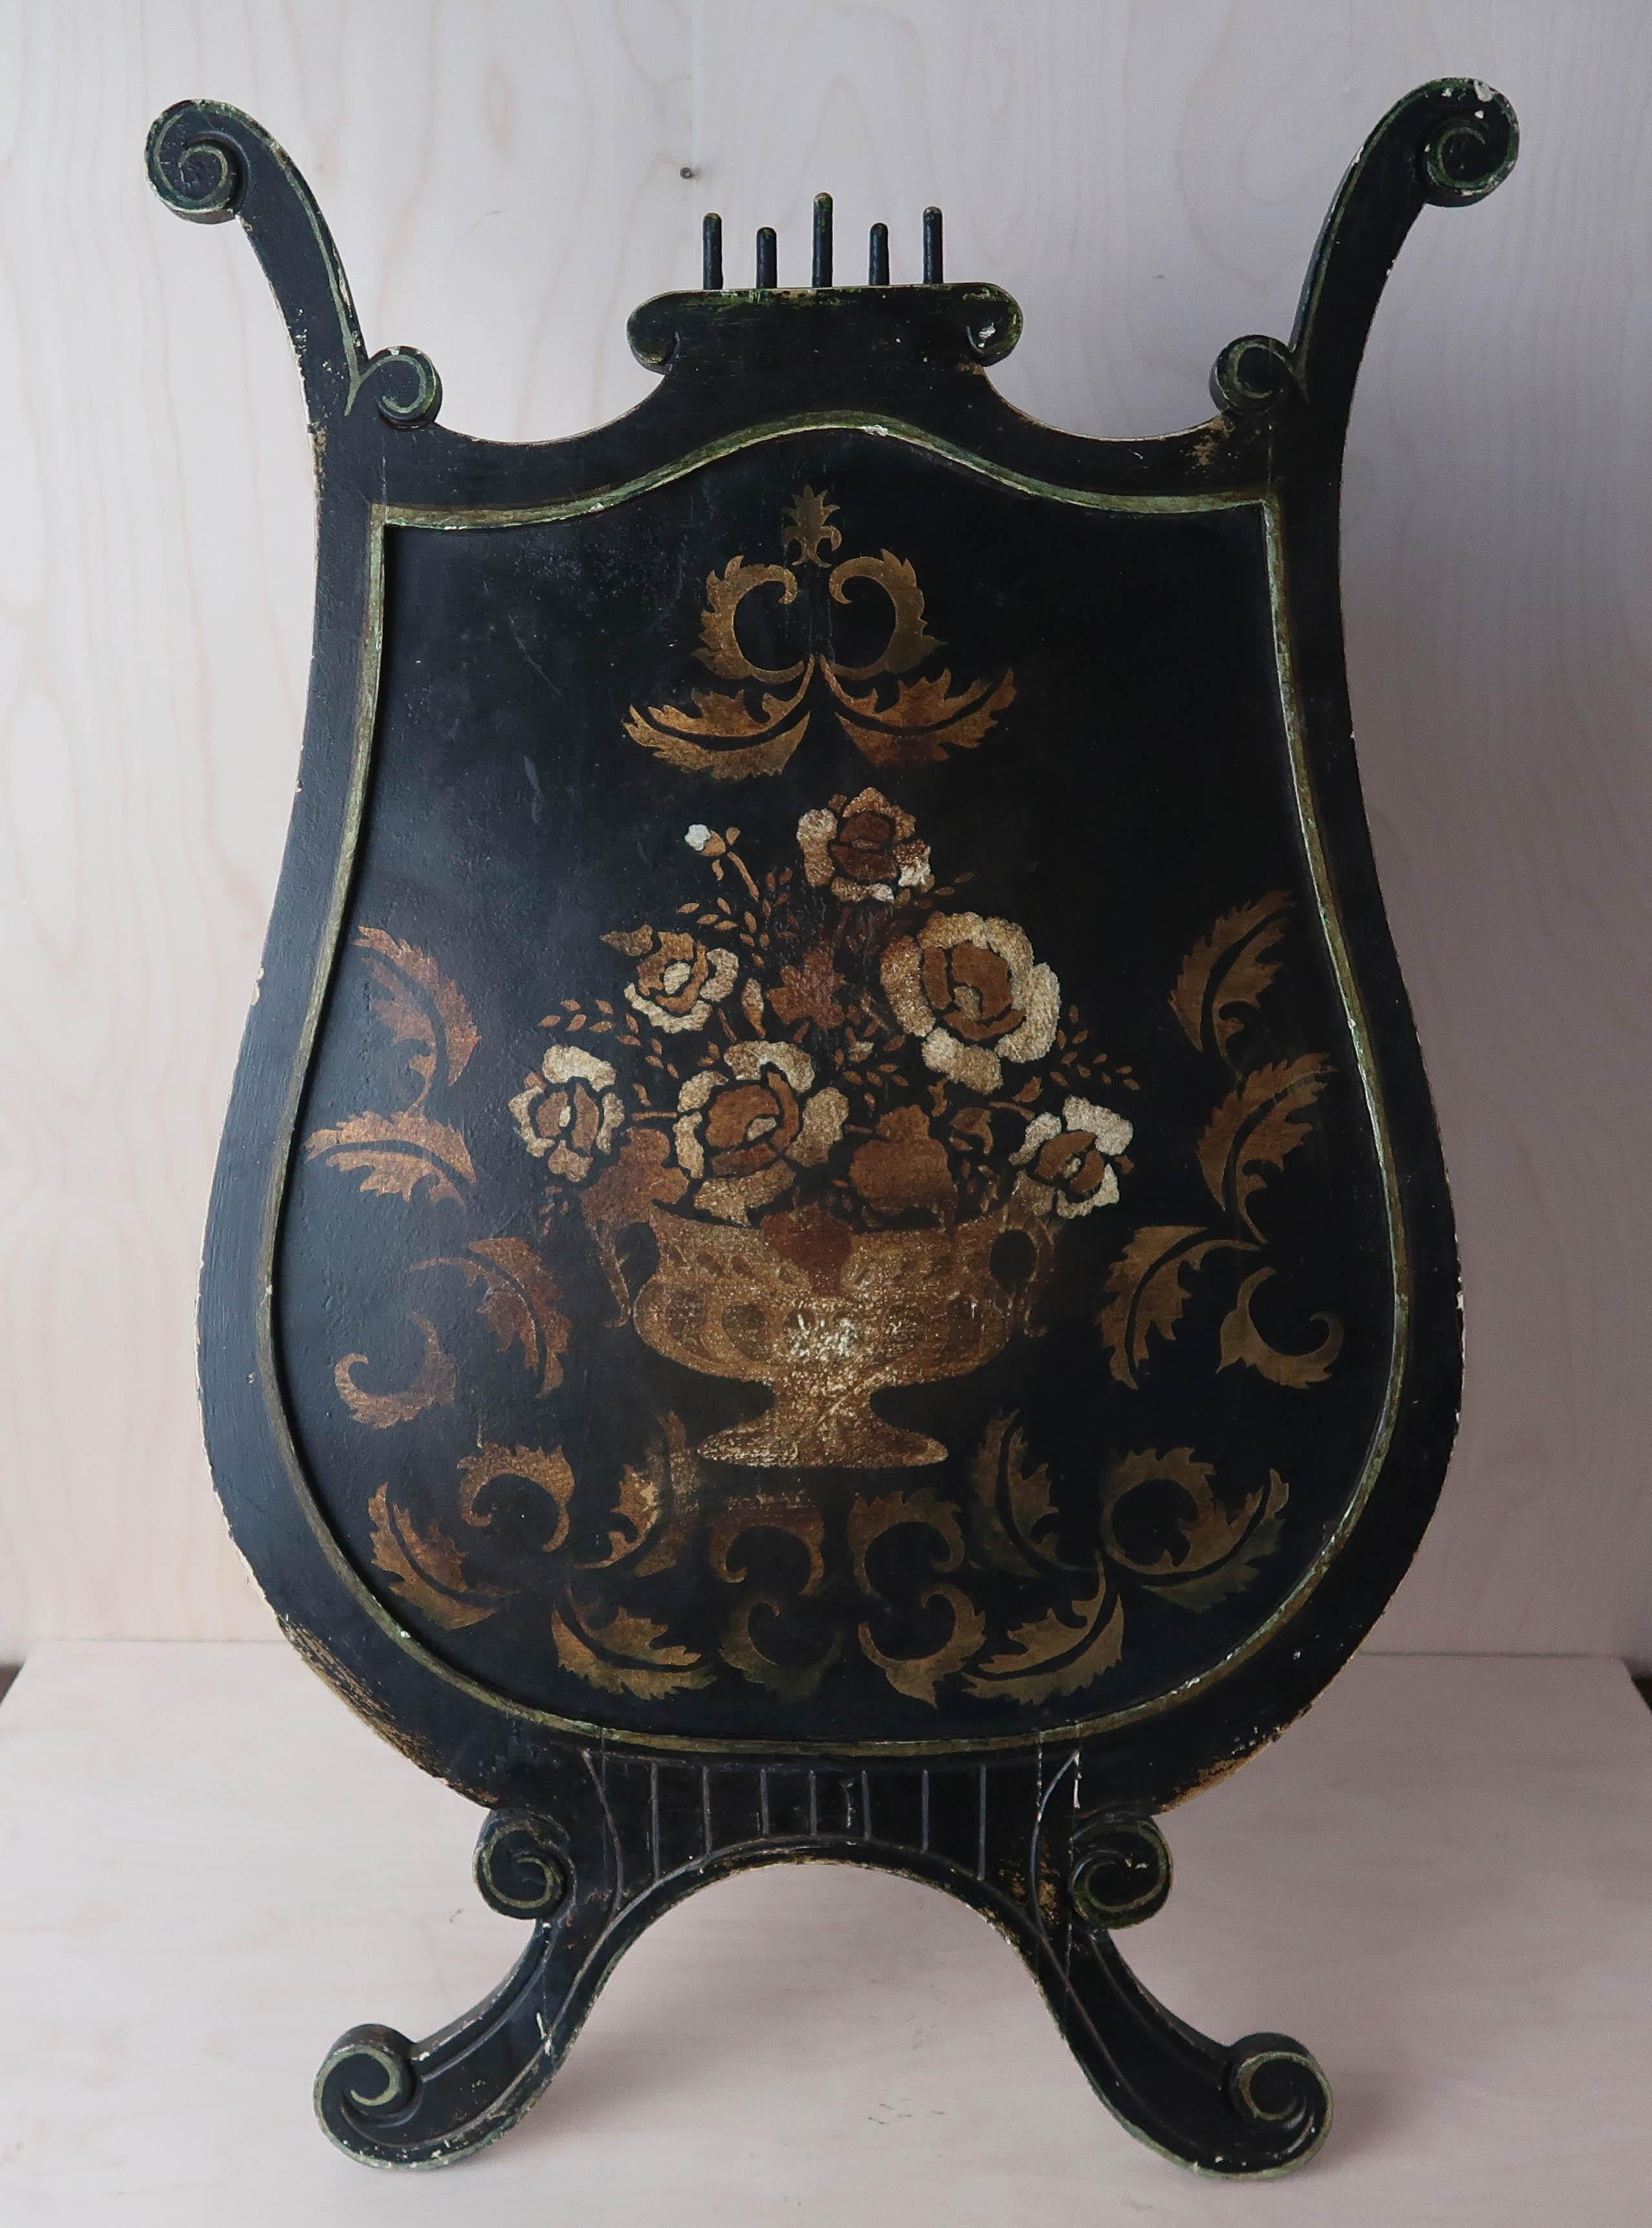 Wonderful painted fireplace screen

Original paint. No re-touches.

Naively painted wood surround and tin floral panel.

The floral panel is in Dutch baroque style

Country House condition.

The easel support at the back is movable.

Sturdy